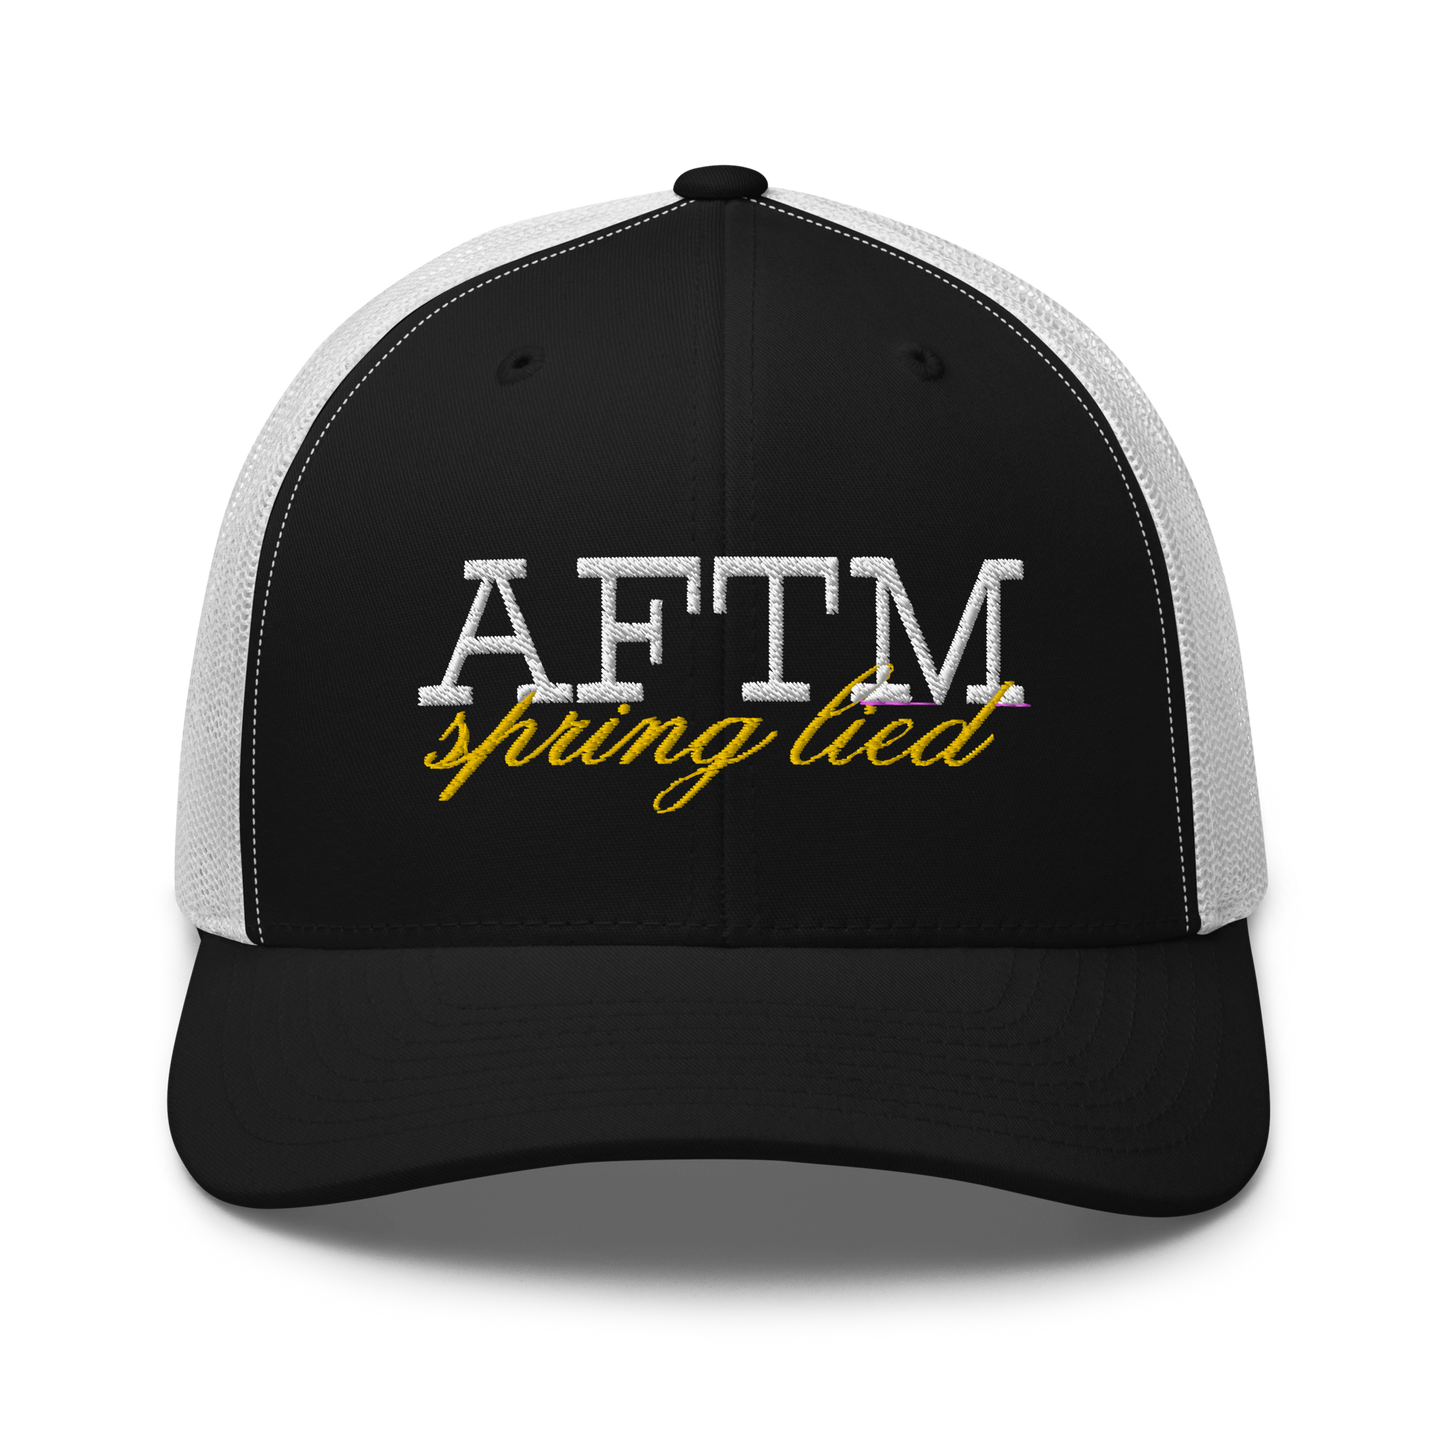 AFTM "Away From The Mire" Trucker Cap | Flat Embroidery | Inspired BMFS Art